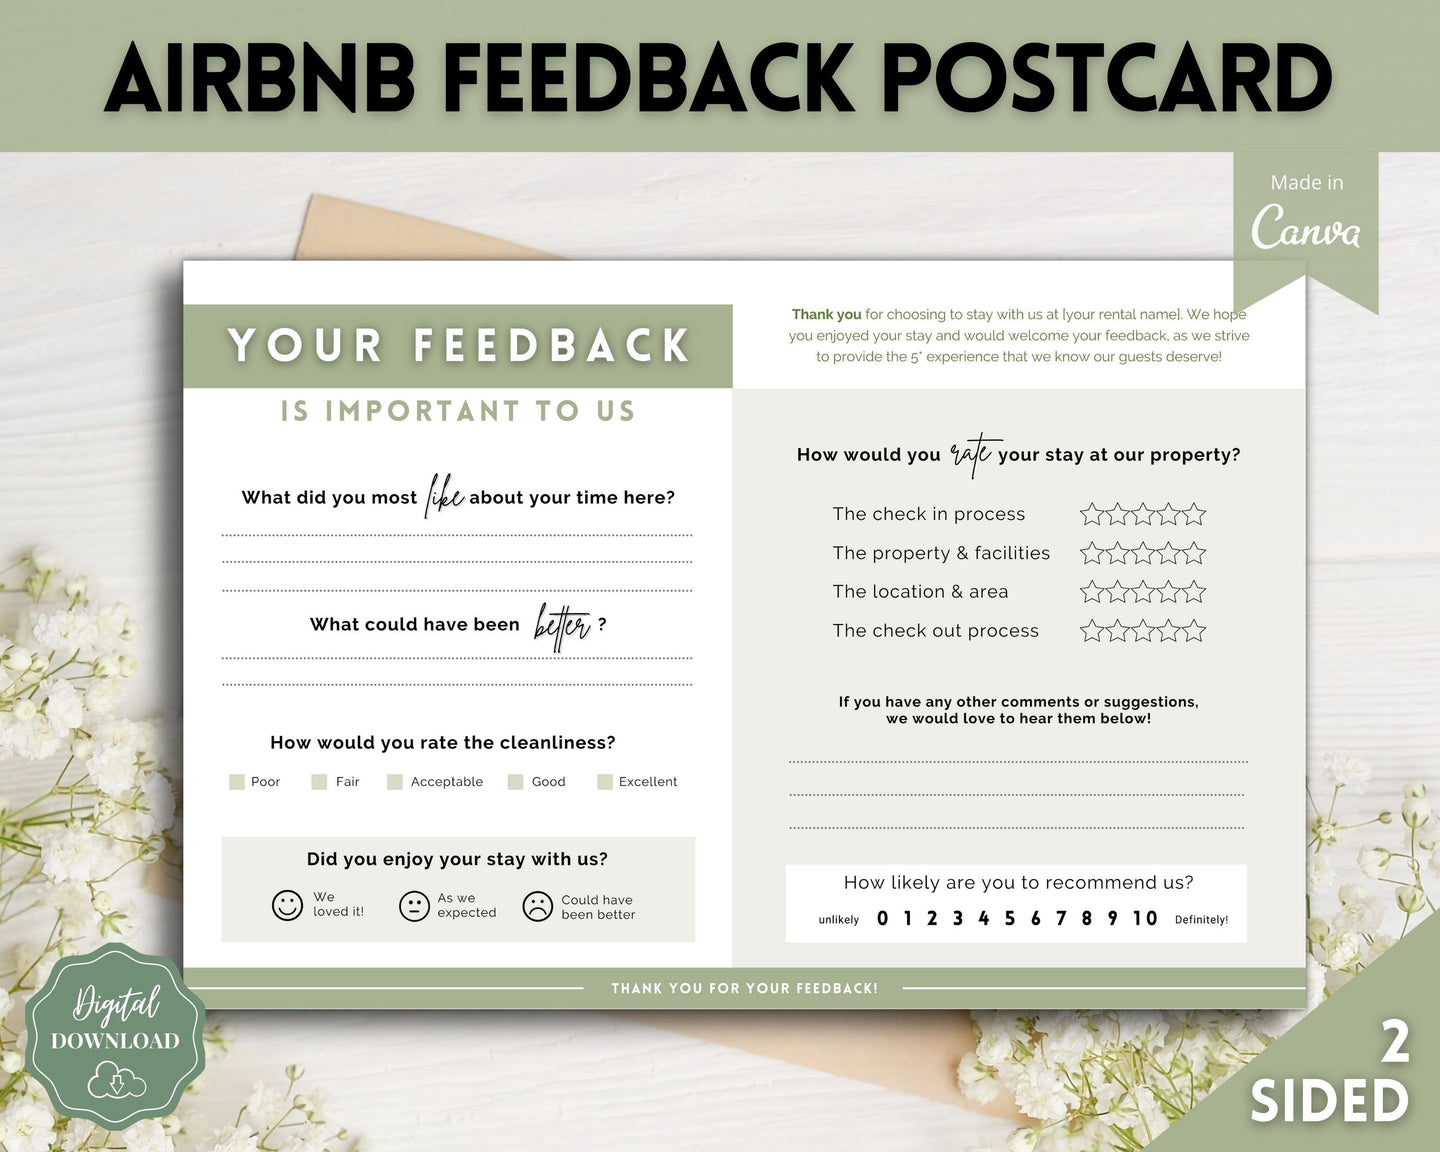 Airbnb Feedback Request Postcard, Editable Airbnb Guest Rating & Review Form, Air bnb Welcome Book, Check Out Signs, VRBO Signage, STR Host - Green